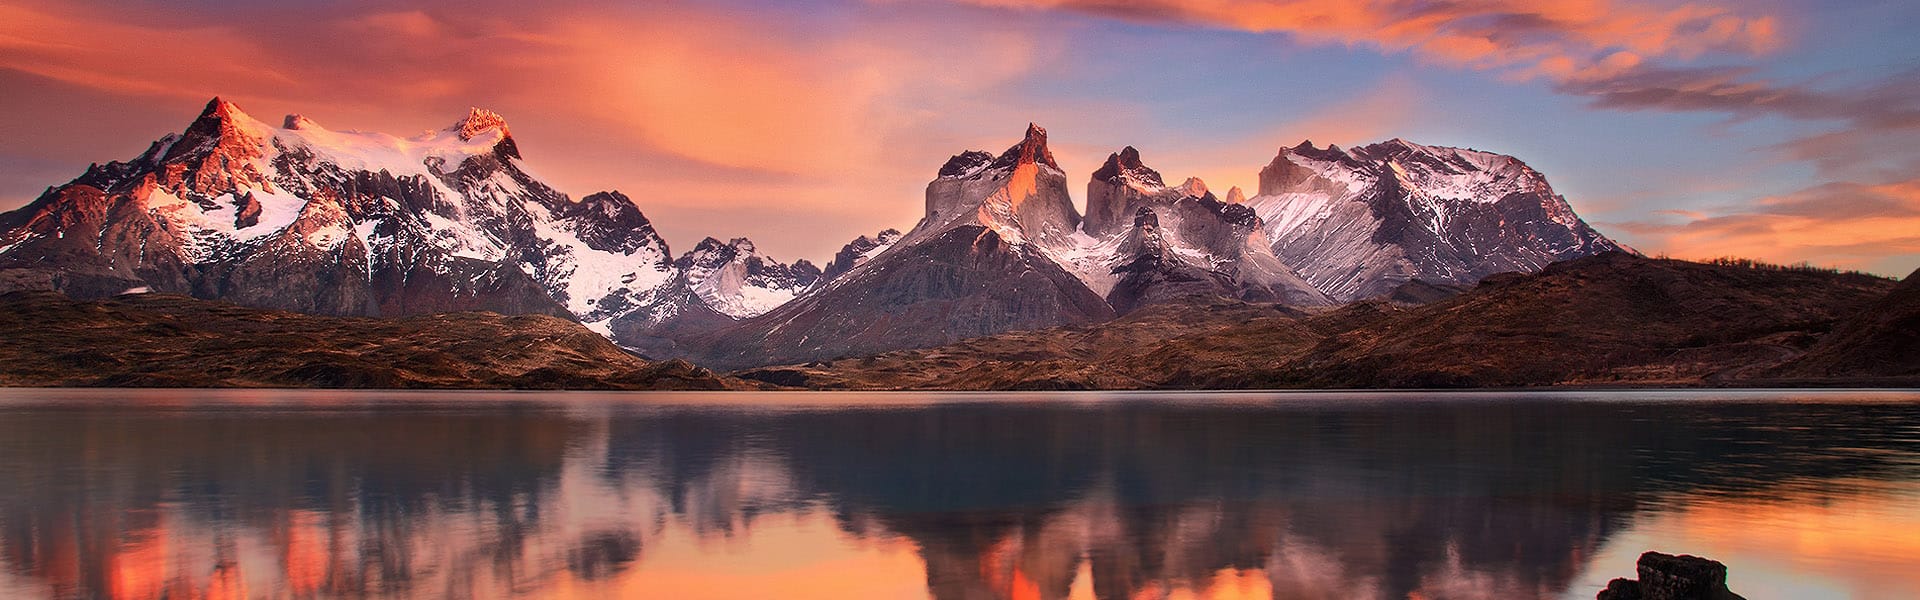 uddanne krave Glat About Patagonia South America - Information & Facts from Quasar Expeditions